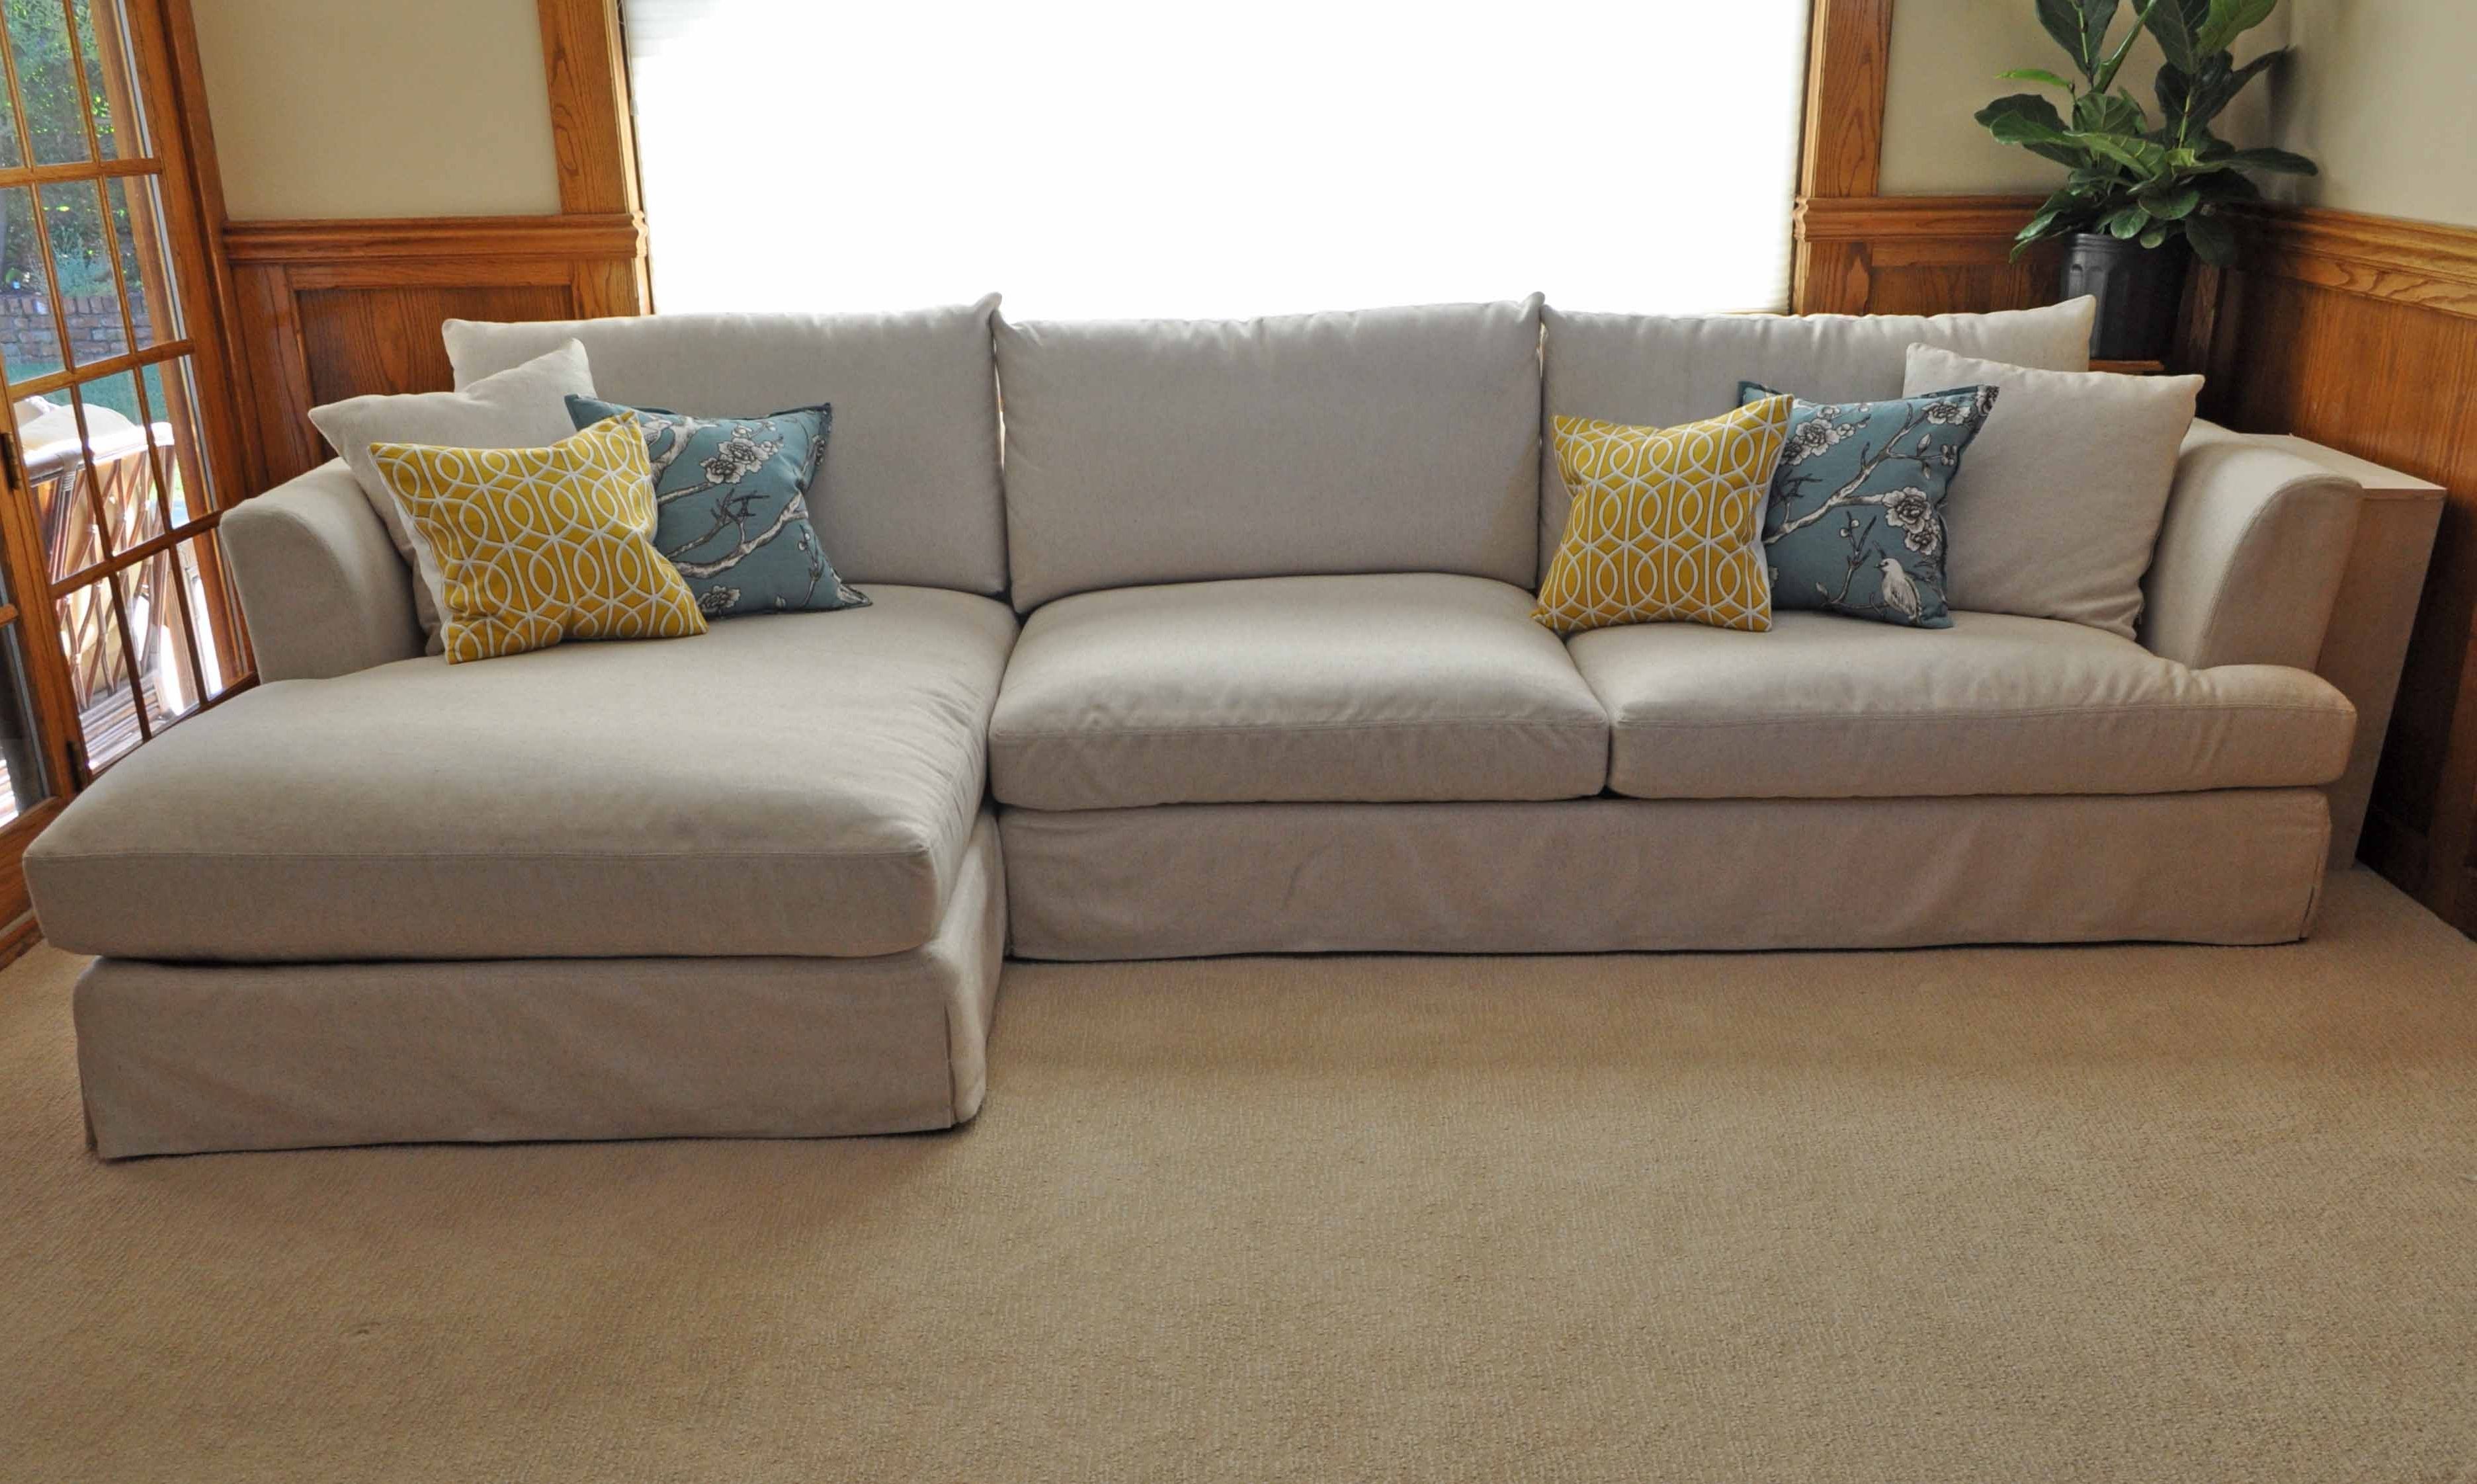 Sleeper Sofa : Comfy Cream Sofa Beige Couch Decor Cream Leather With Latest Cream Colored Sofas (View 12 of 20)